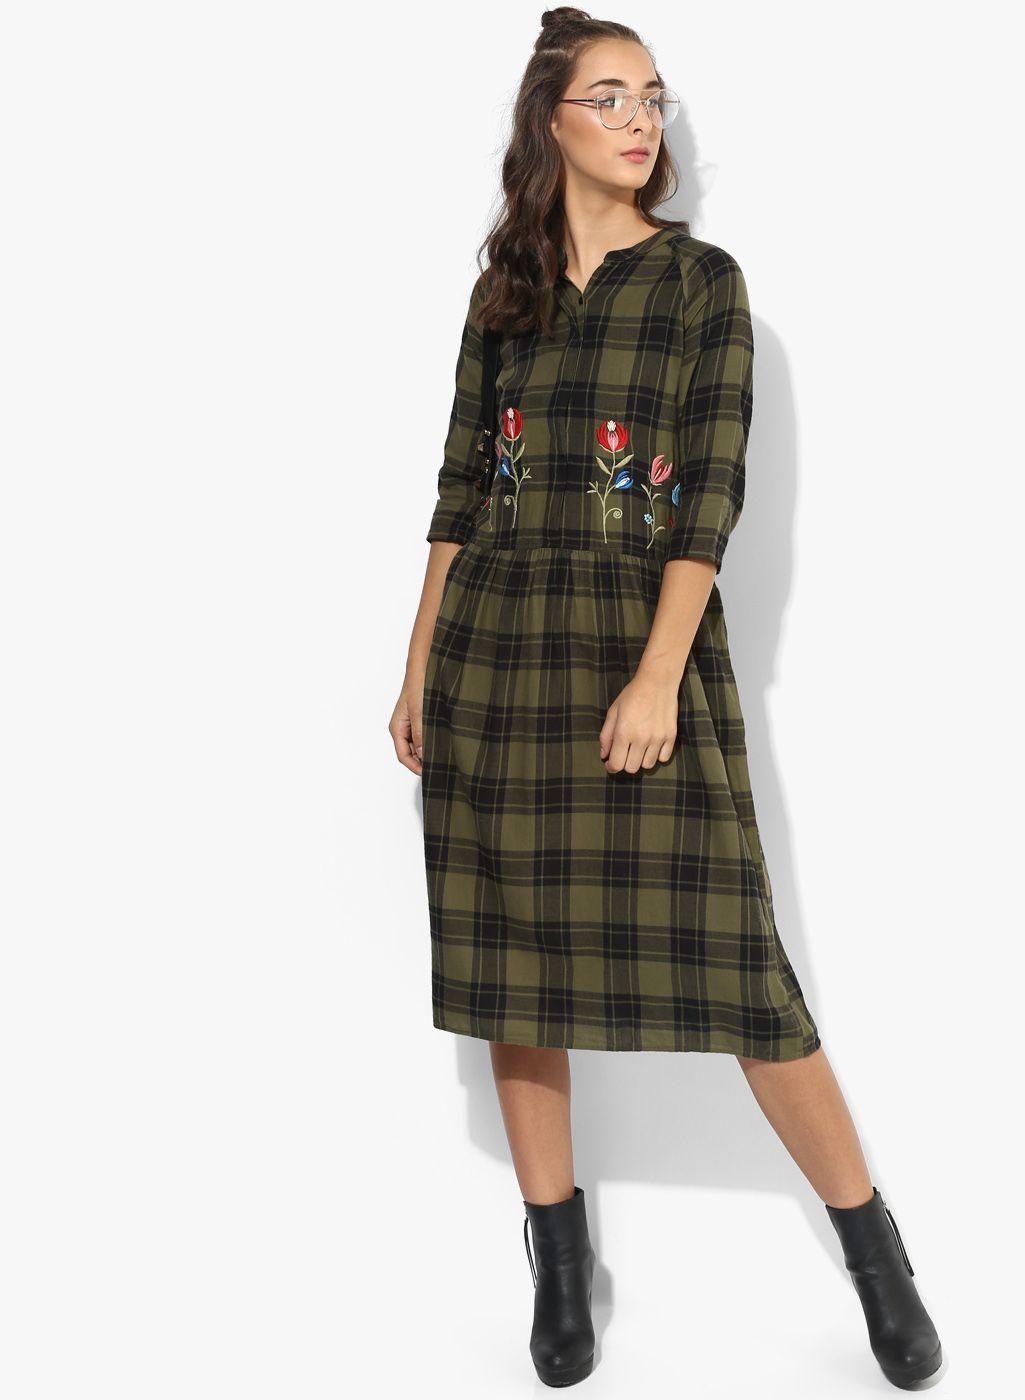 evah london olive & black checked embroidered a-line dress